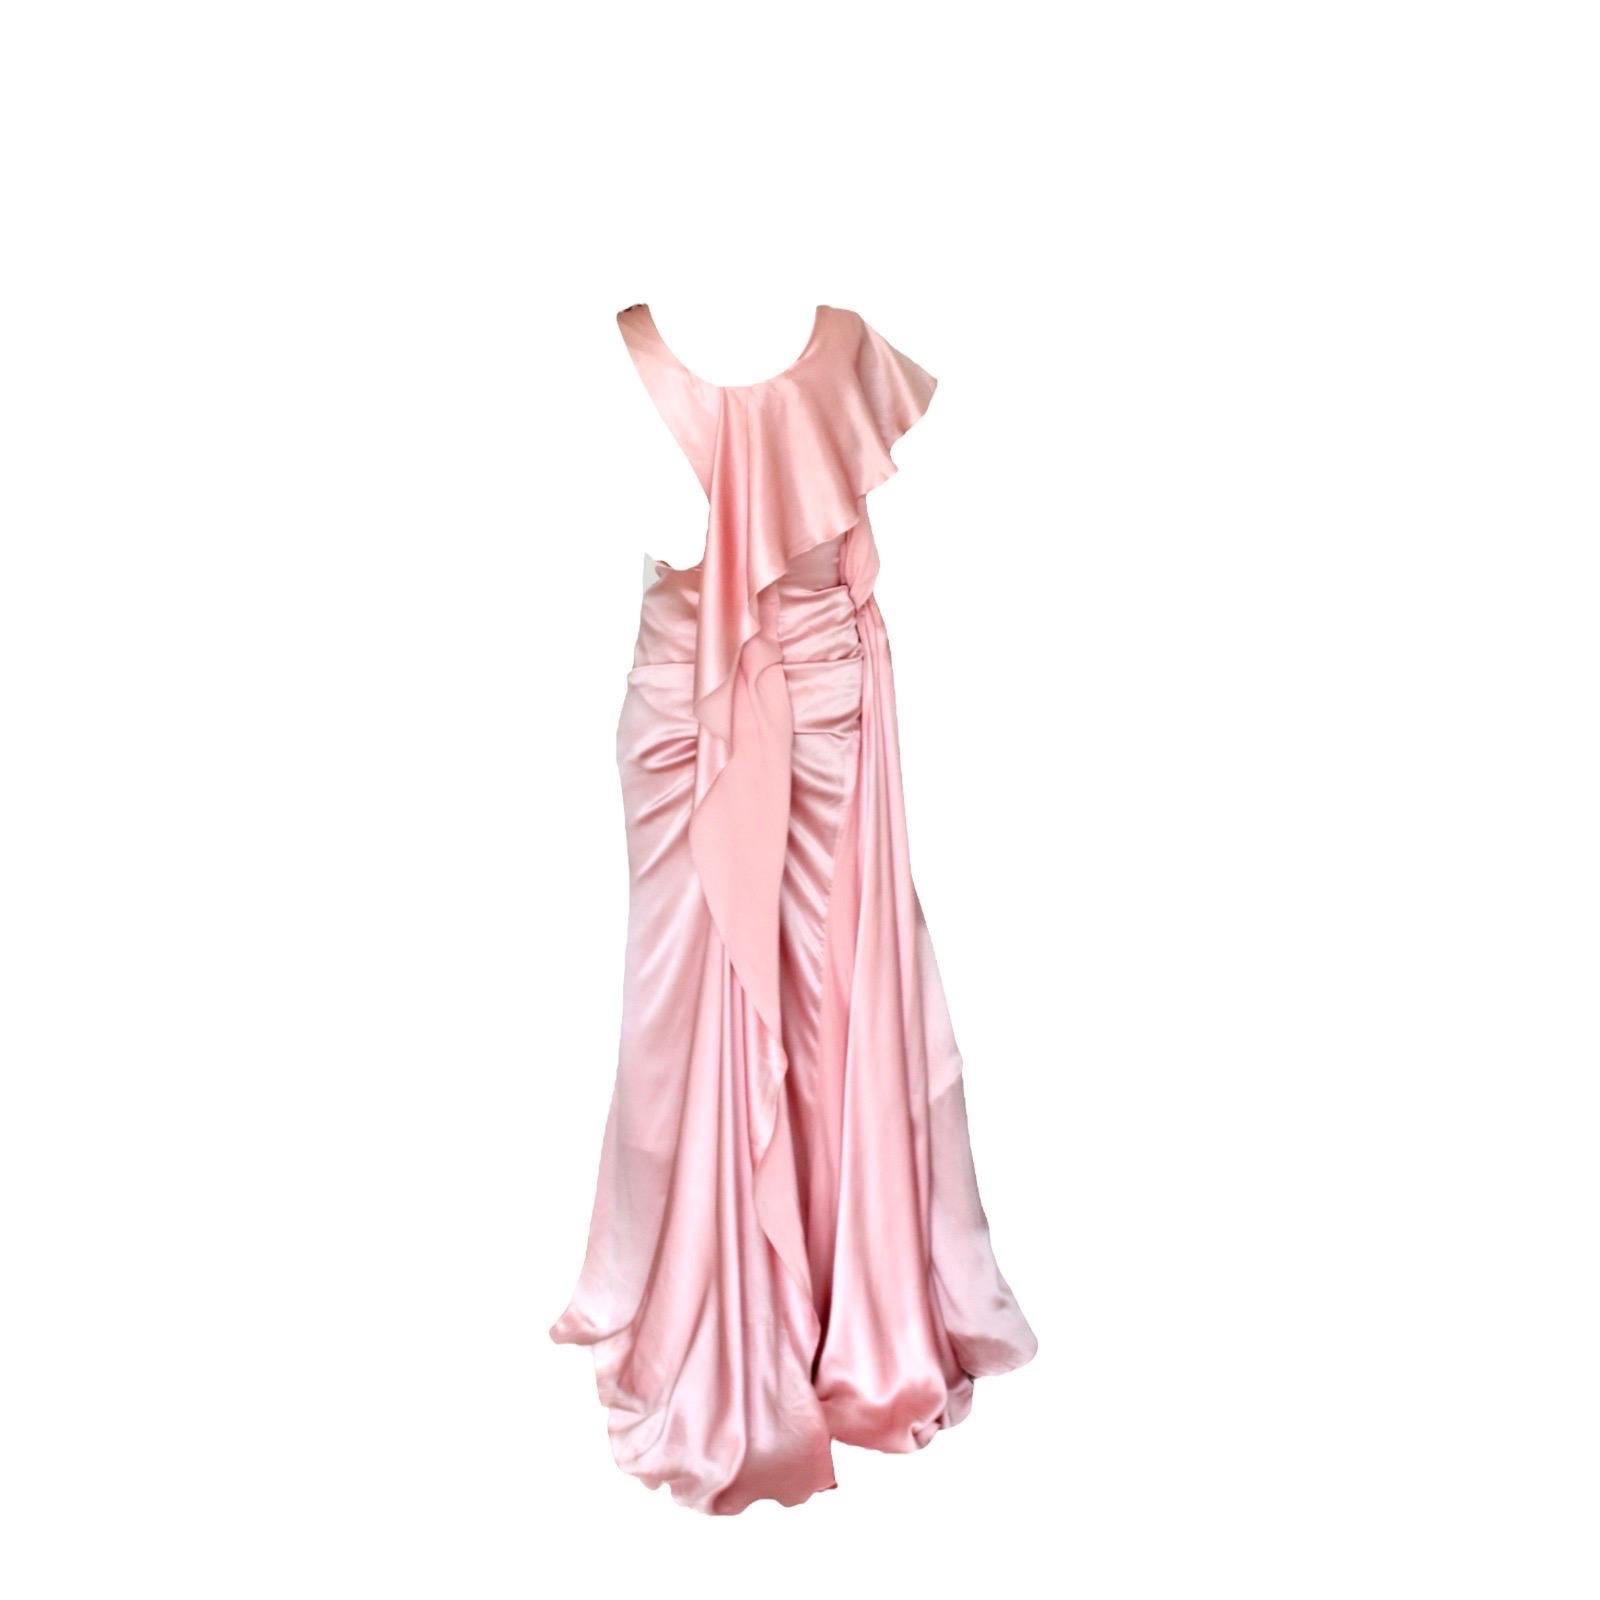 UNWORN Pink Versace Asymmetric Draped Goddess Engagement Evening Gown Dress 38 In Good Condition For Sale In Switzerland, CH